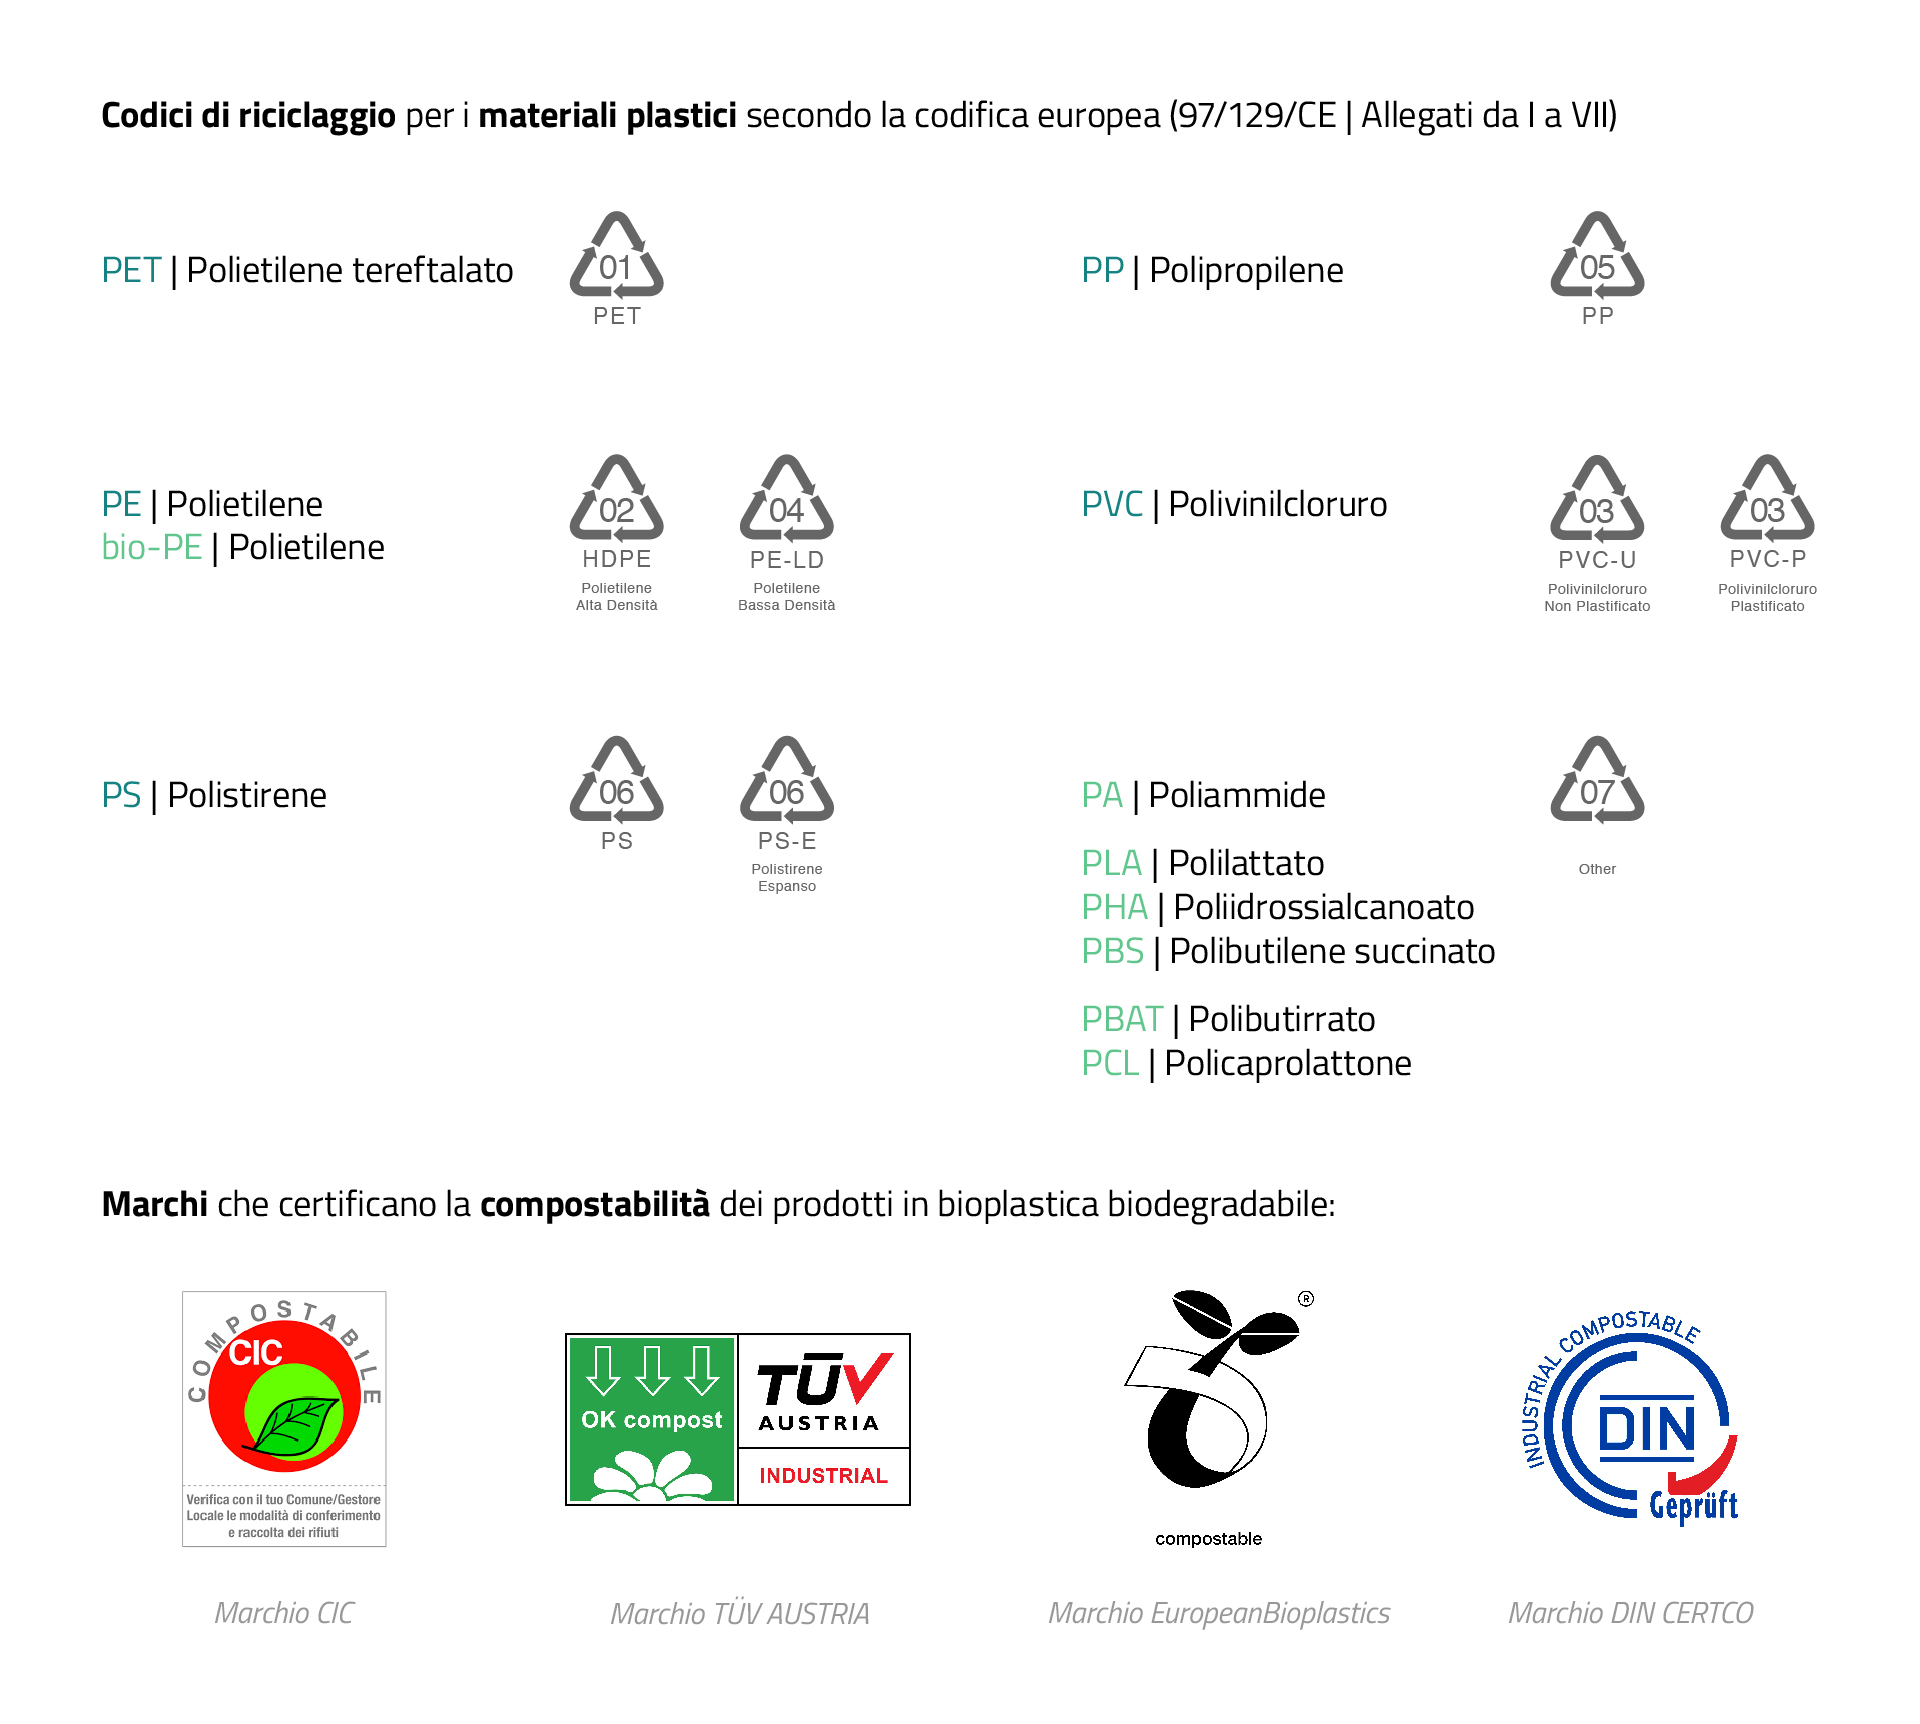 Recycling codes and compostability certification marks